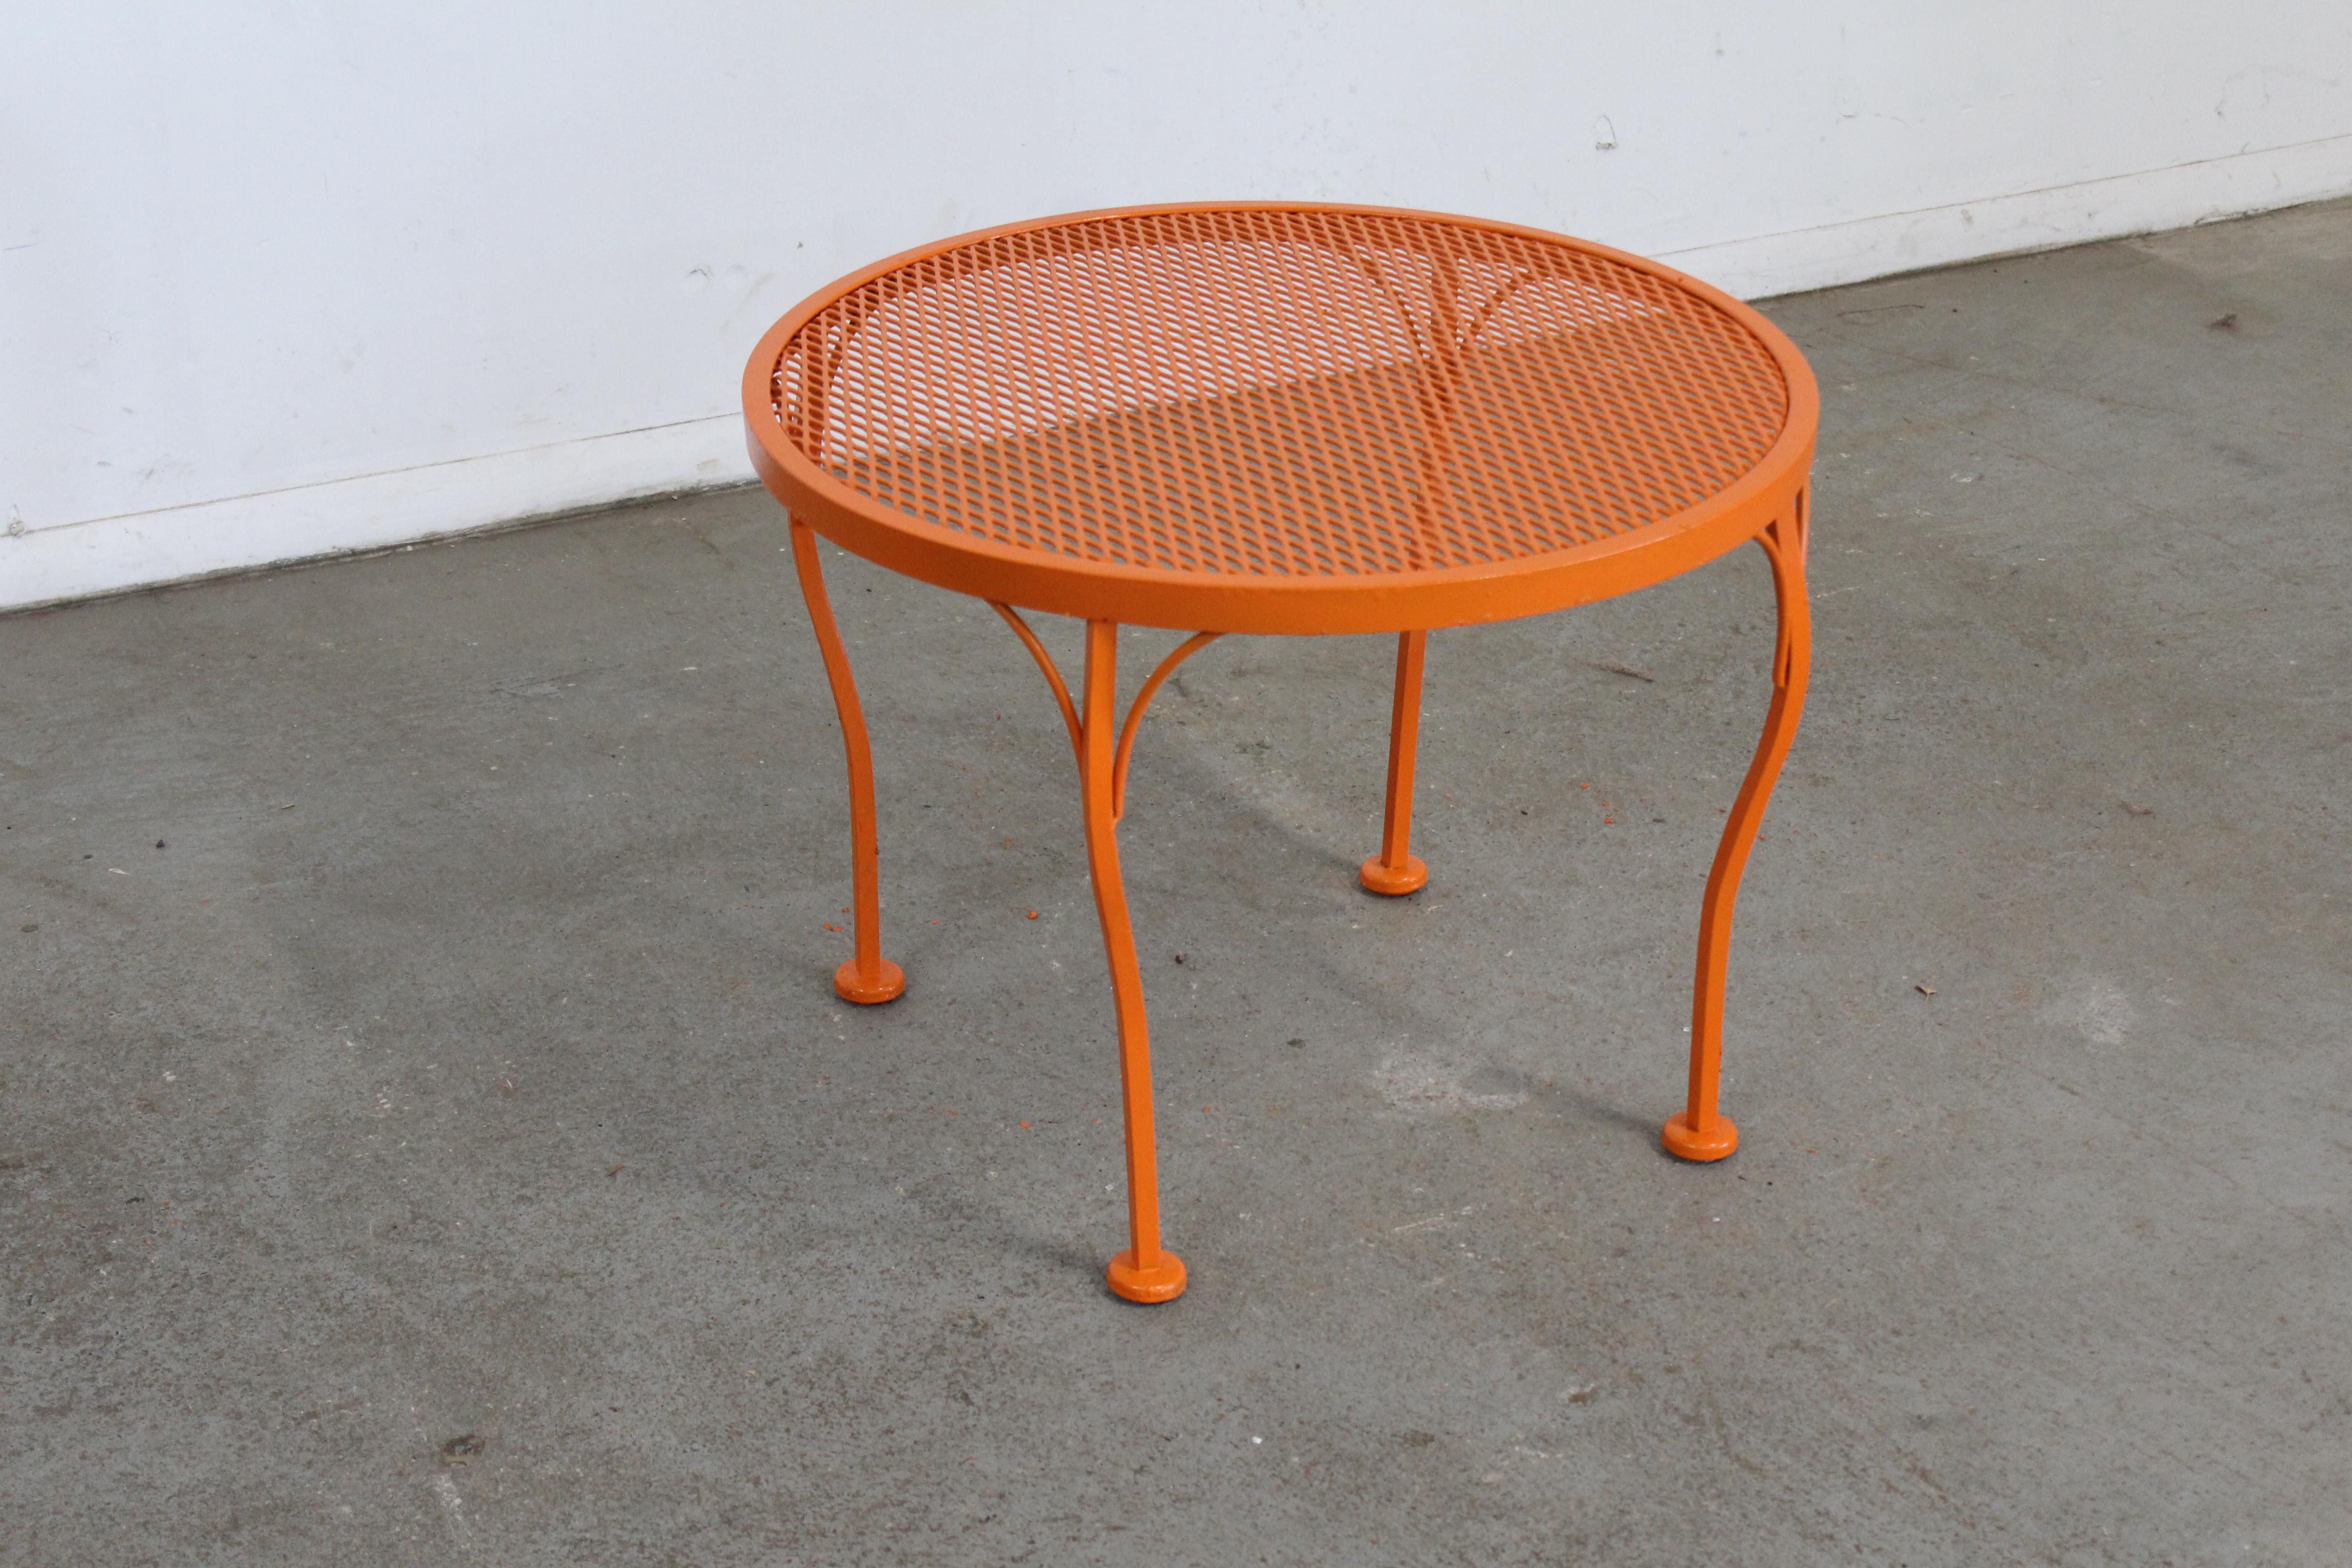 Mid-Century Modern Salterini Style Outdoor/Patio Coffee/Side Table

Offered is a mid-century outdoor/patio round table , circa 196o's. This piece is made of welded steel and features a diamond mesh and has been repainted in an atomic orange. This